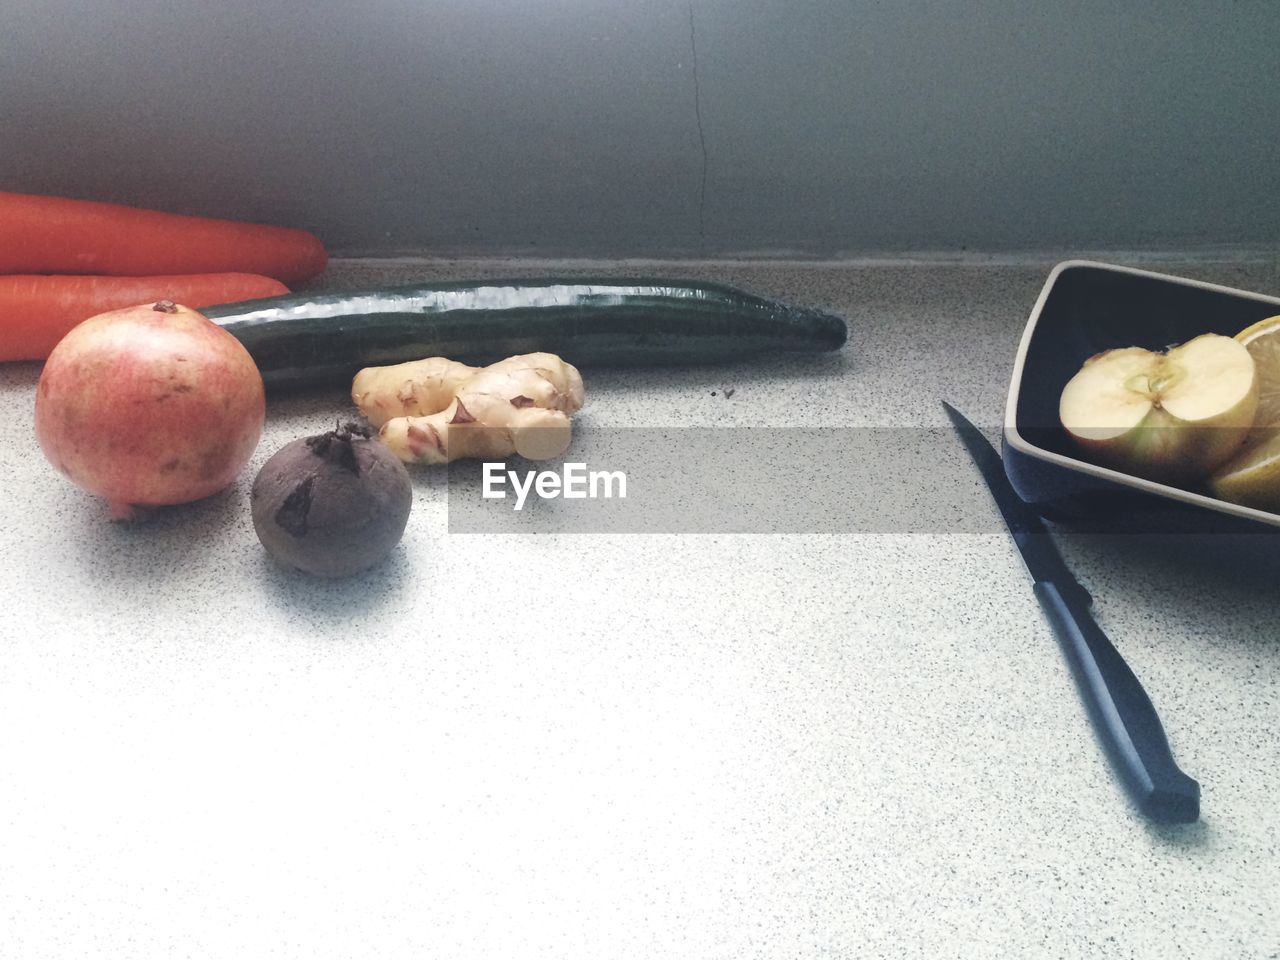 High angle view of vegetables and knife on kitchen counter